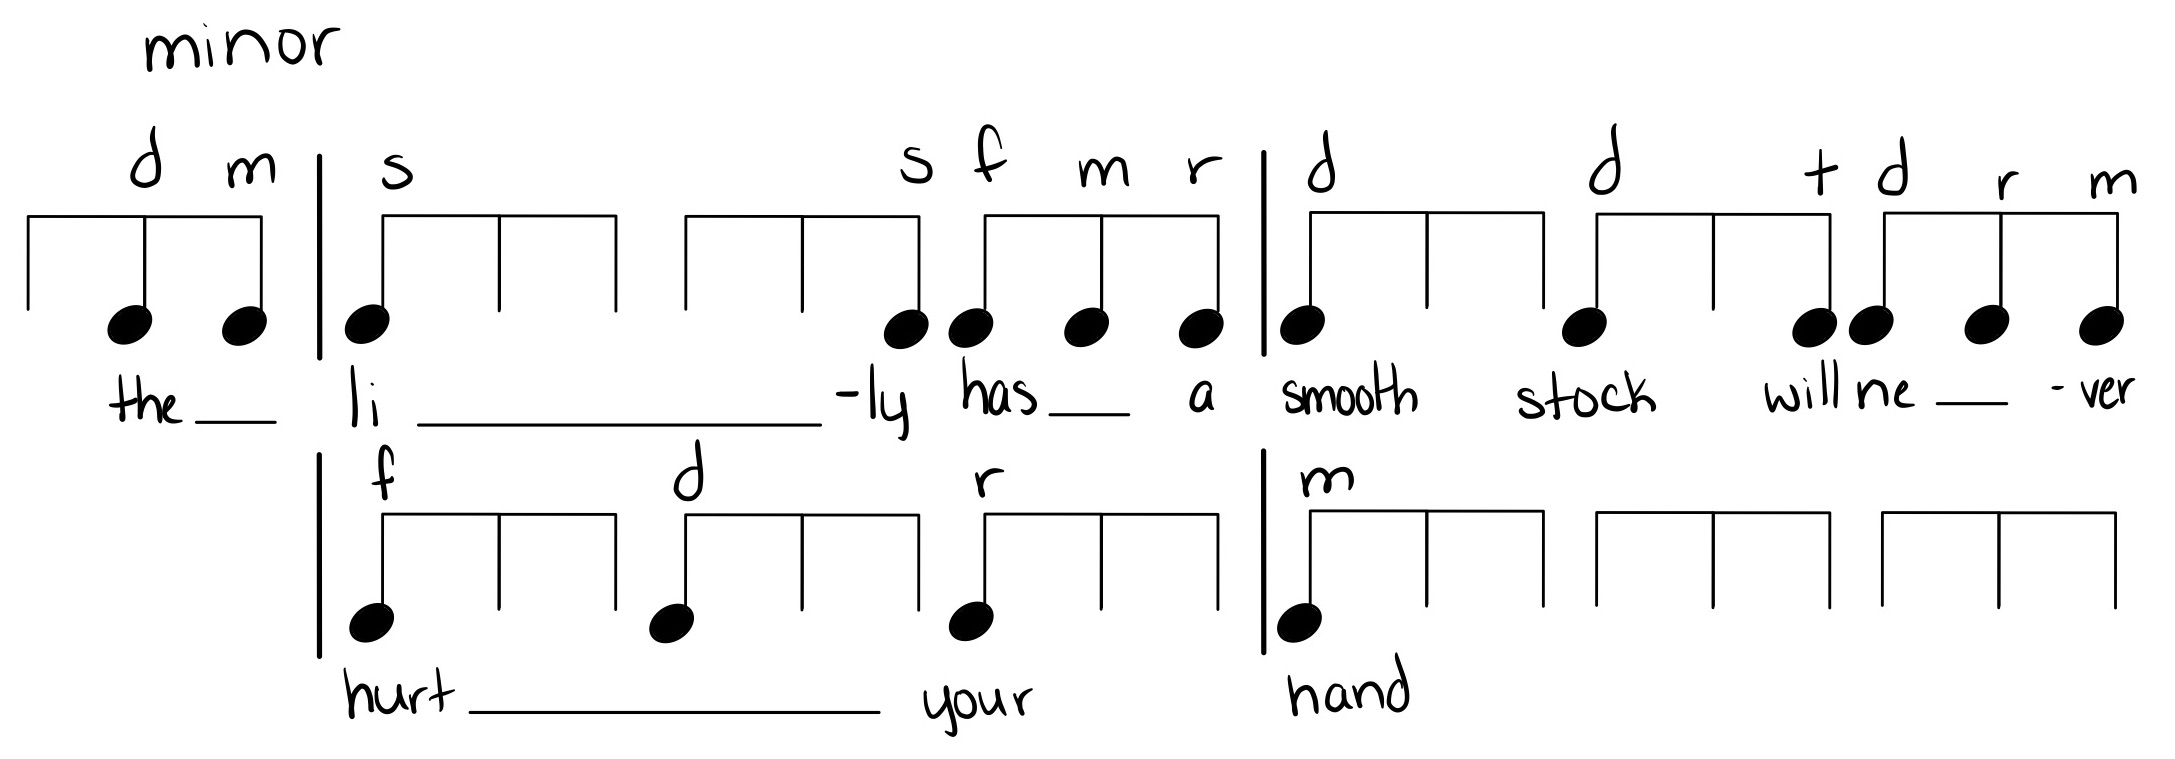 Pitch and rhythm notehead shorthand for 0:18–0:31 of the melody of the song “The Rose.” The word “minor” is written at the beginning to indicate a minor key. Vertical barlines separate the measures. Each third of a beat is represented by the stem of an eighth note, beamed together in groups of three. Each stem where a new note sounds is given a notehead. The first letters of the solfège syllables that represent the notes are written above the stems with noteheads. The lyrics of the melody are written below the noteheads.